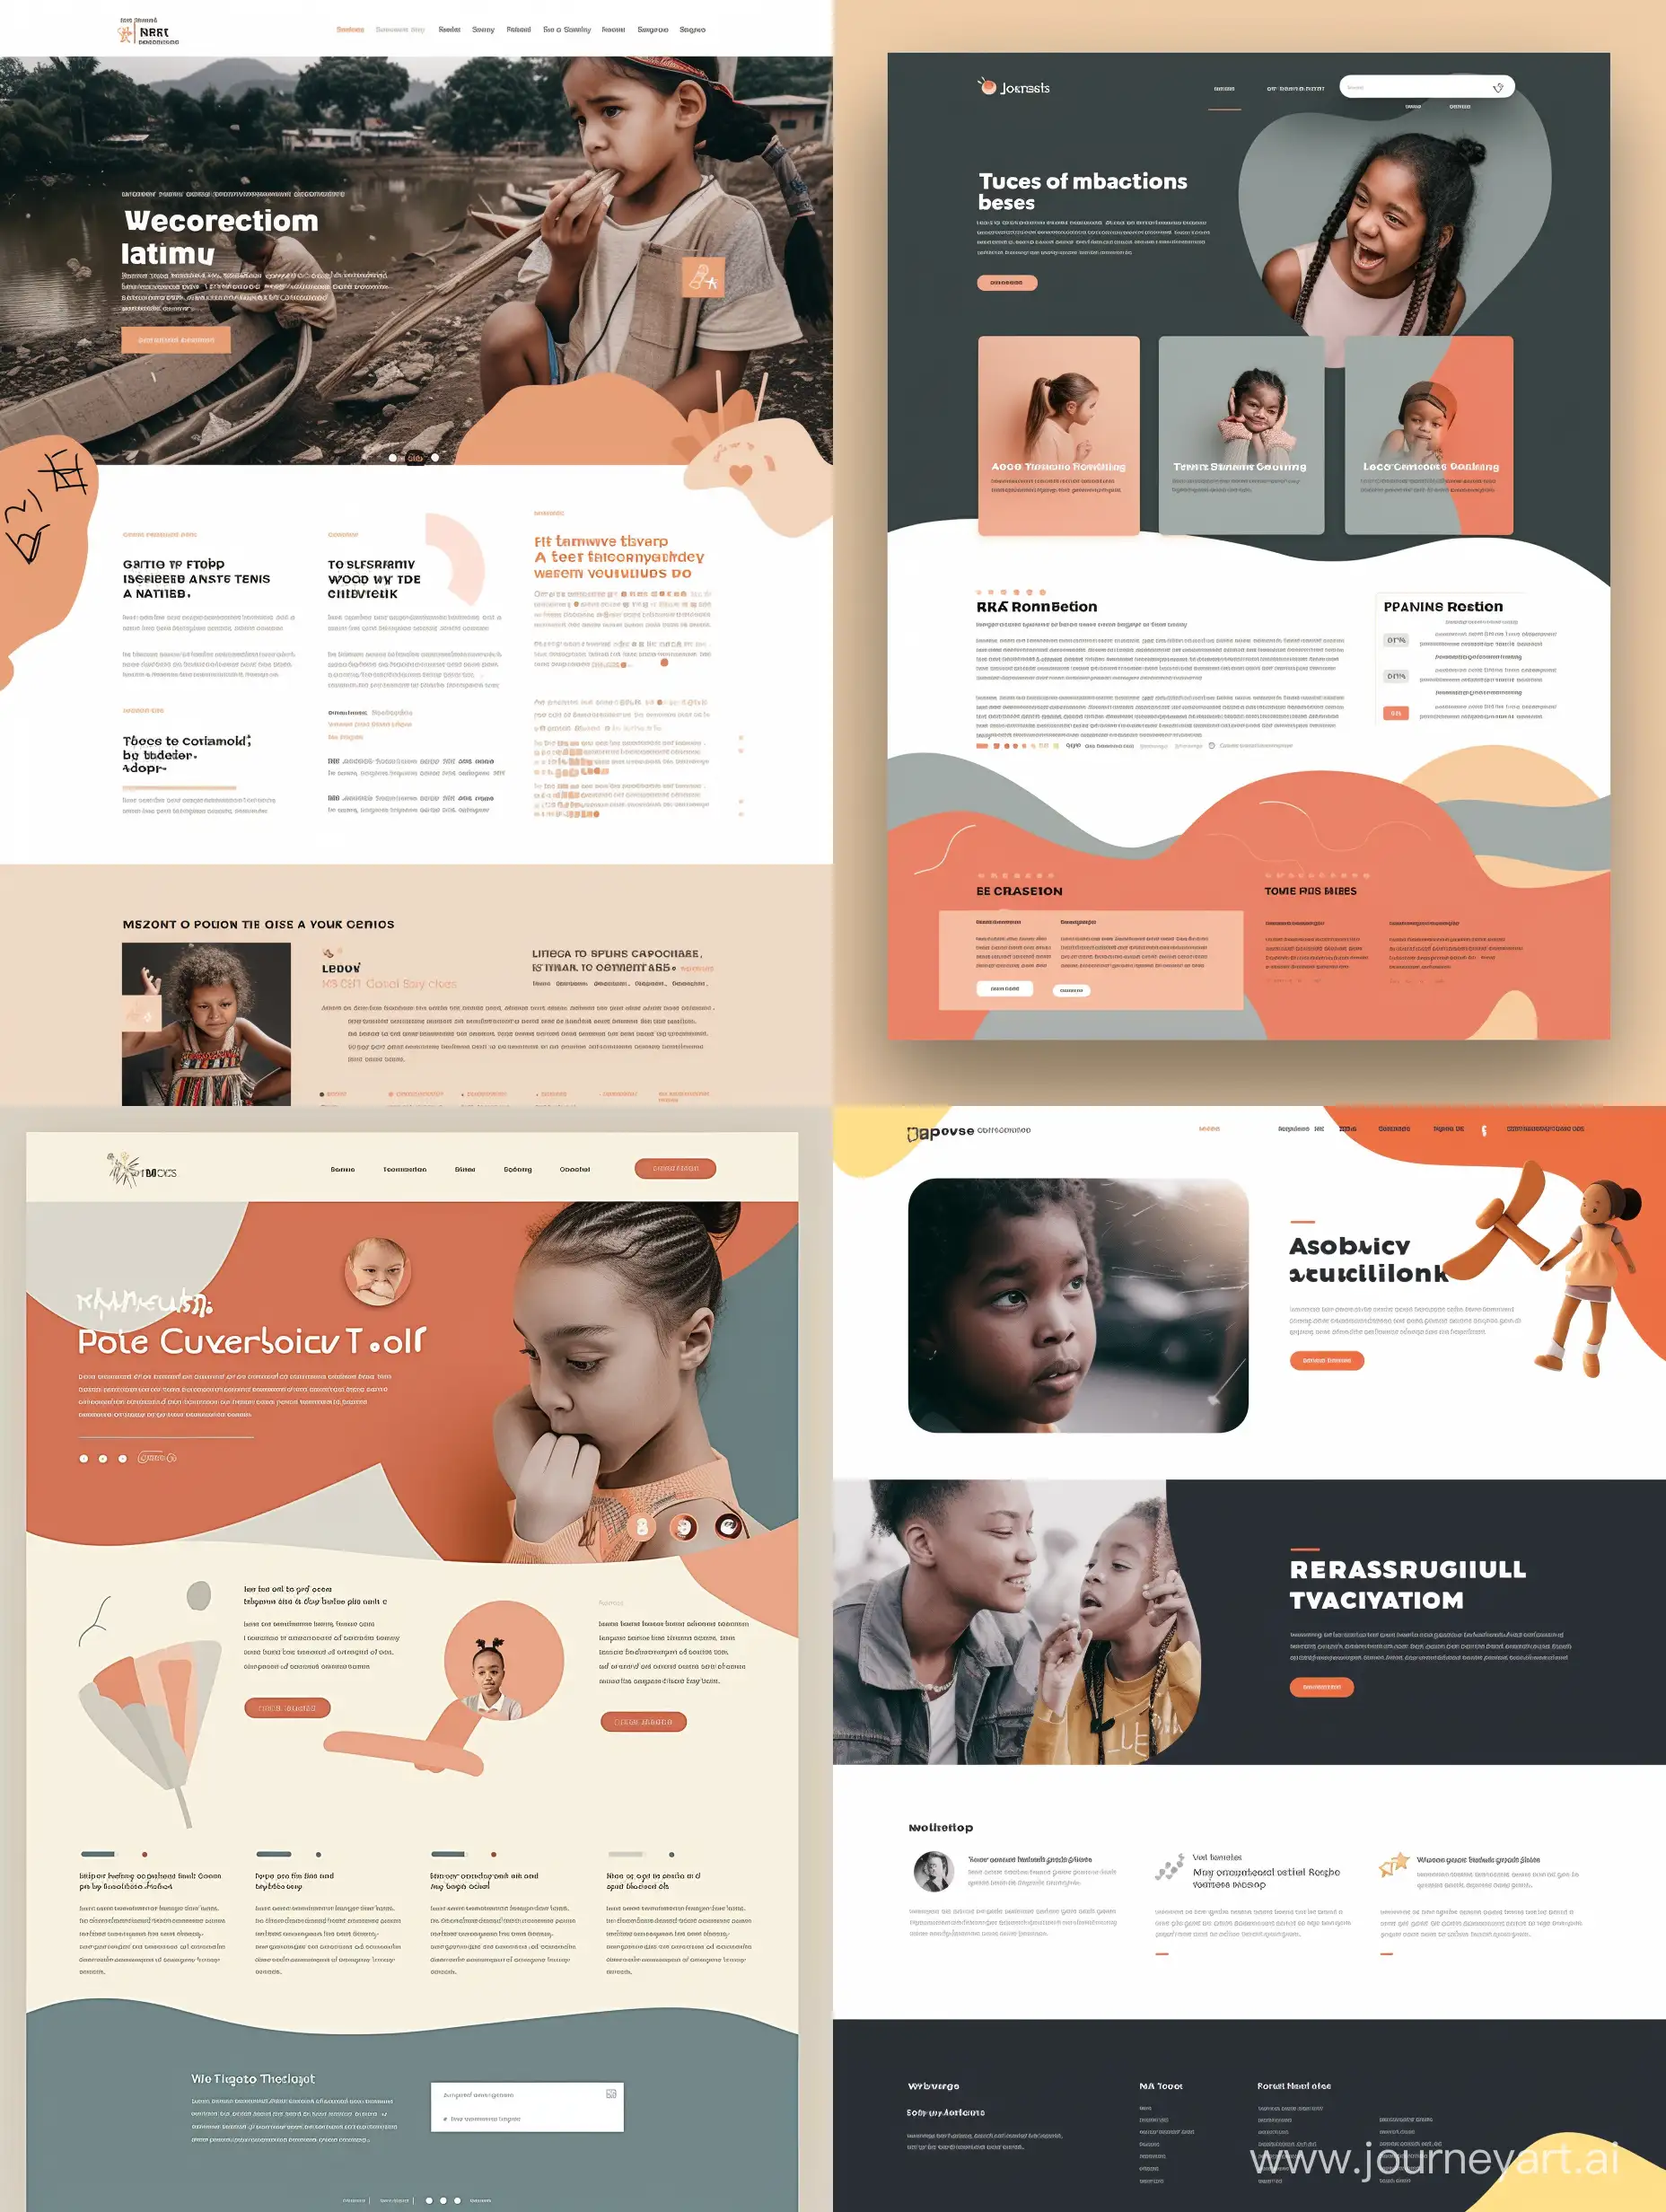 Impactful Landing page about social criticism and conflicts, racism and child trafficking, little text and large images, statistics and studies, muted colours